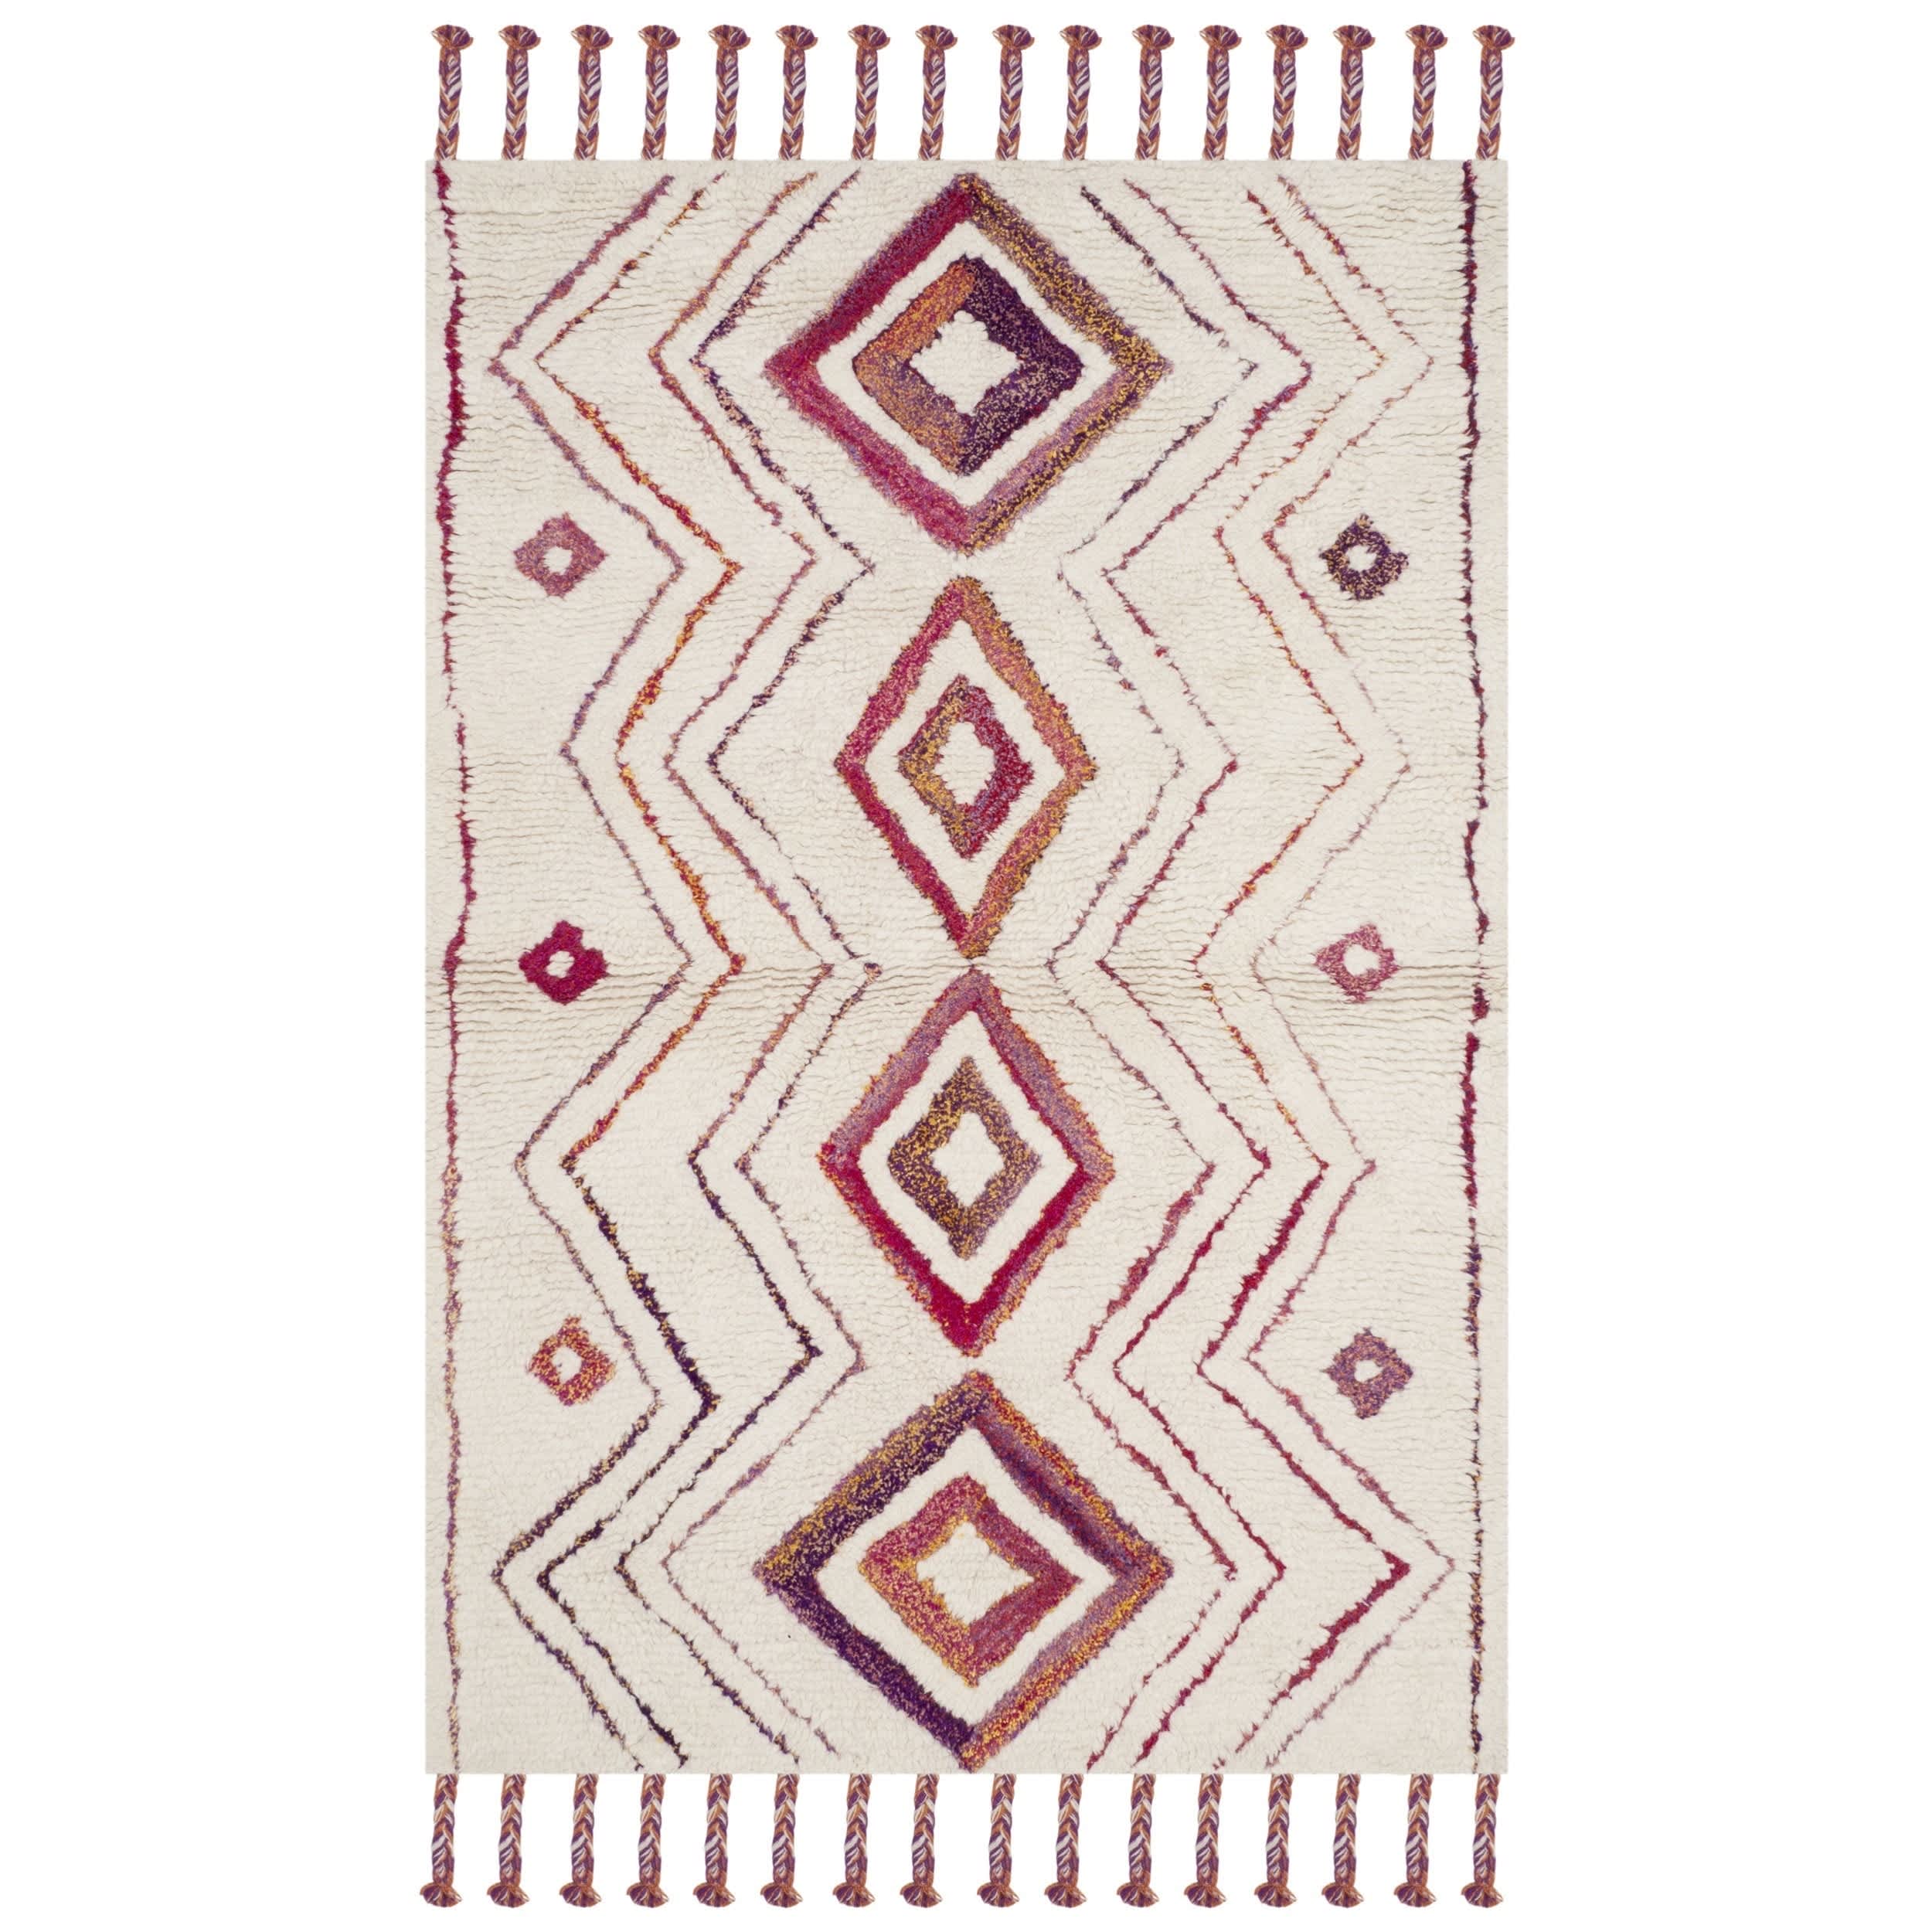 https://cdn.apartmenttherapy.info/image/upload/v1588010851/at/style/2020-04/Saturated%20Rugs/Casablanca_CSB214_Hand_Tufted_Moroccan_Rug_Target.jpg